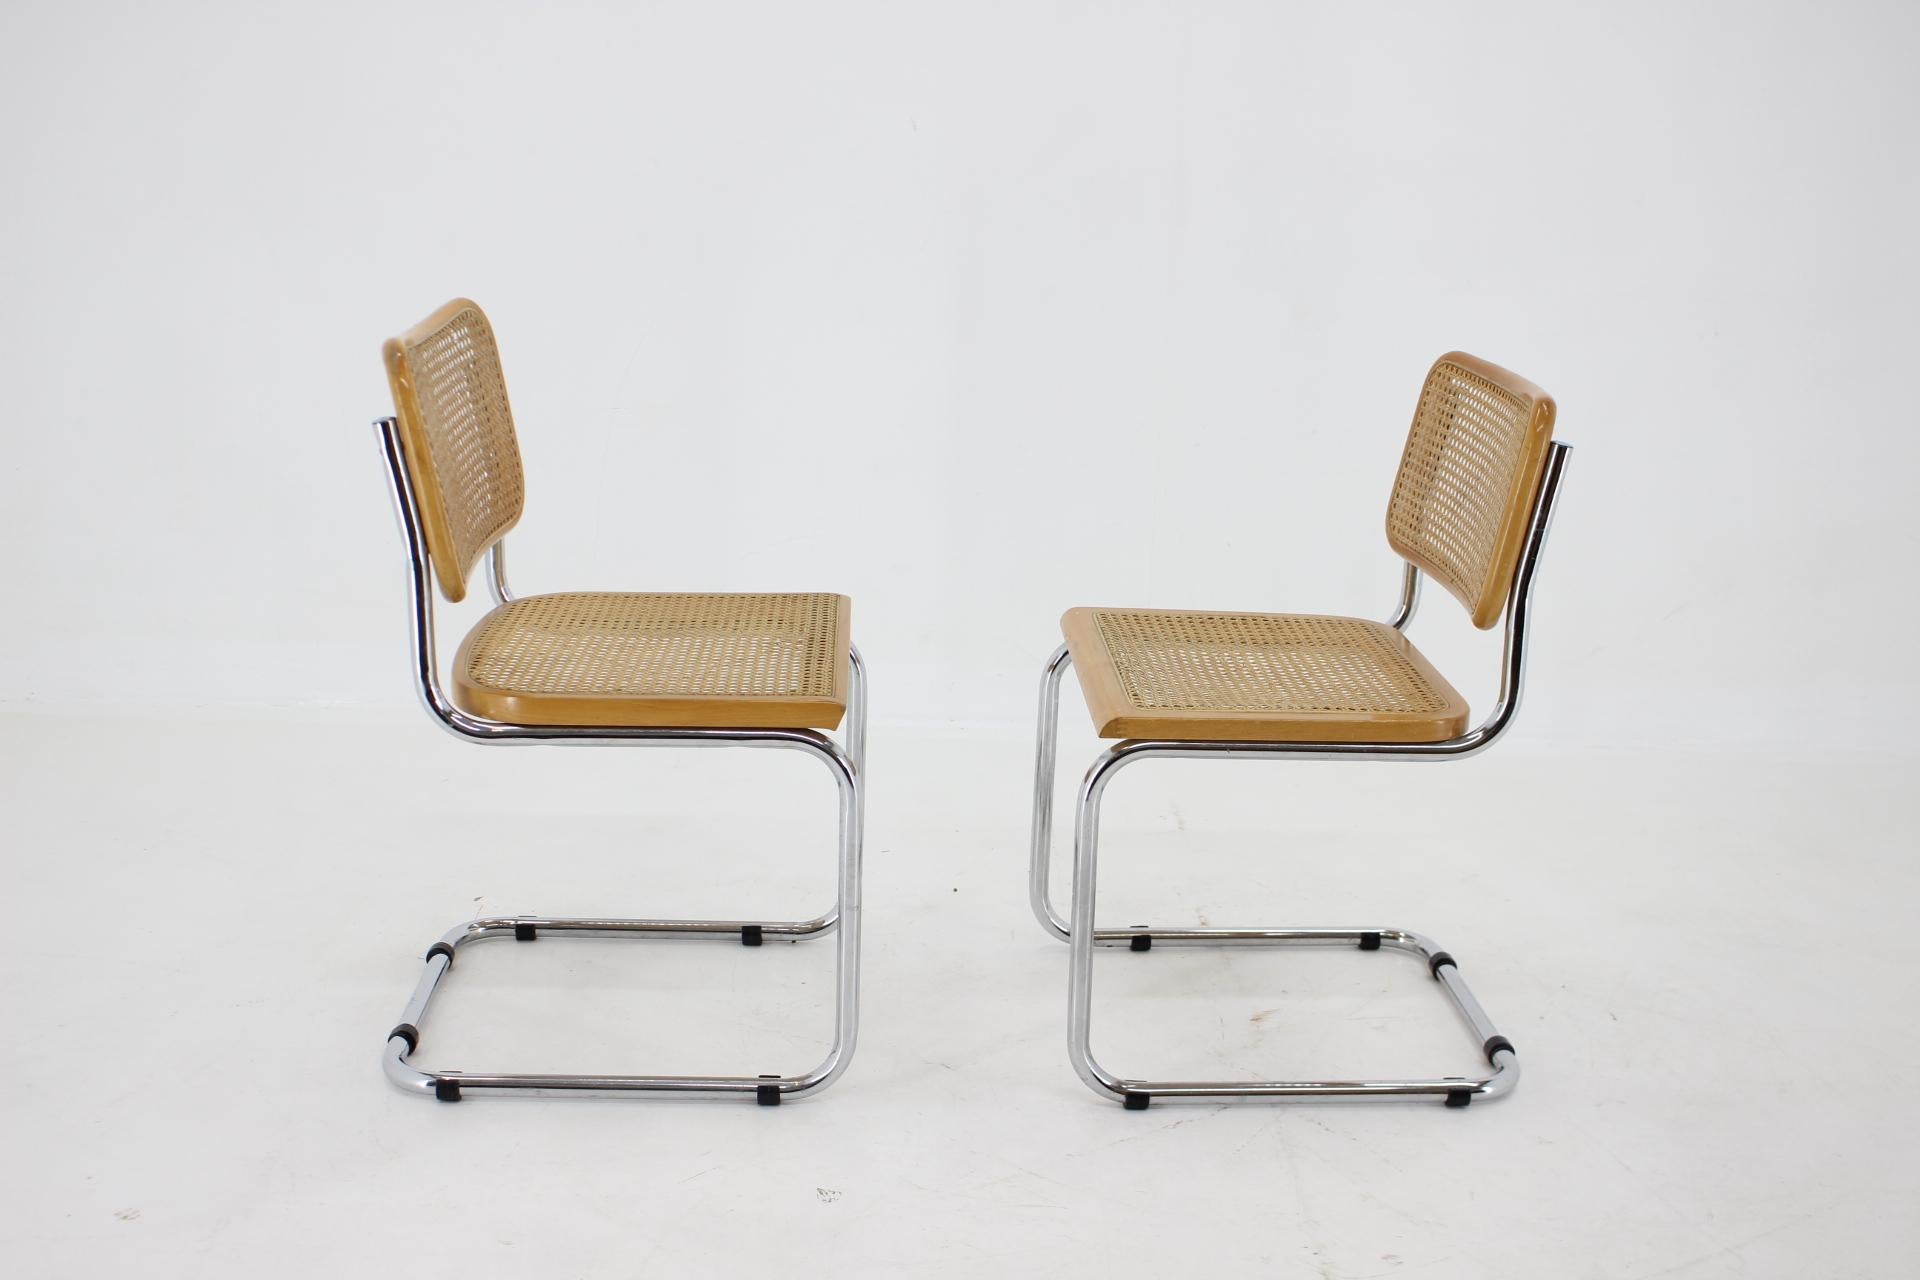 - Good original condition with minor signs of use.
- The caned string seats are in good original condition.
- The chrome plated parts in good condition with some signs of use. 
- Height of seat 45 cm.